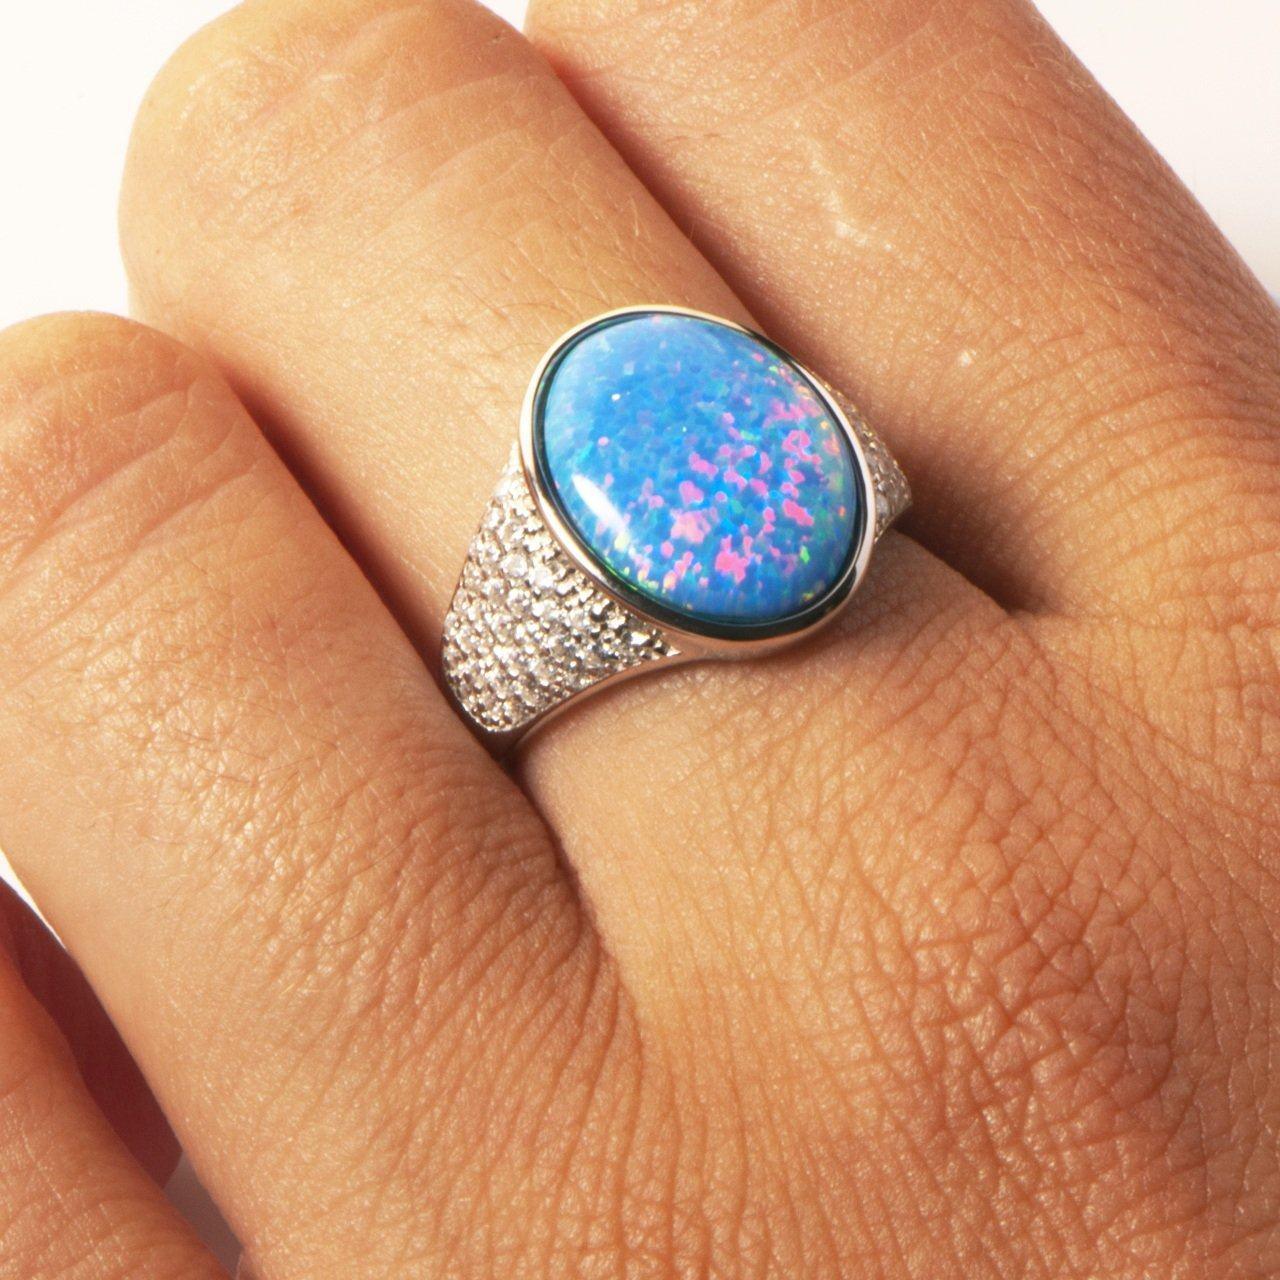 This photo shows a model wearing a 925 sterling silver cocktail ring paired with an oval opalite gemstone and high quality cubic zirconia